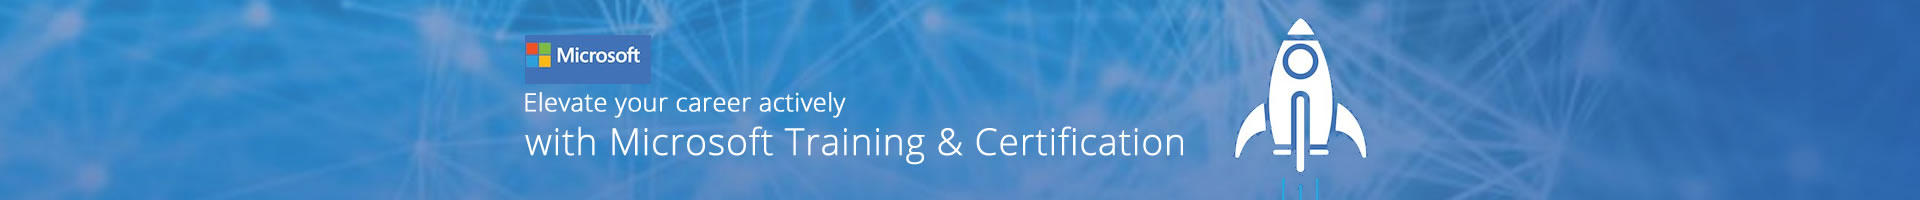 CompTIA A+ Boot Camp, CompTIA A+ Training Boot camp, CompTIA A+ Certification Boot Camp, CompTIA A+ Certification Boot Camp Training - Vibrant Technologies